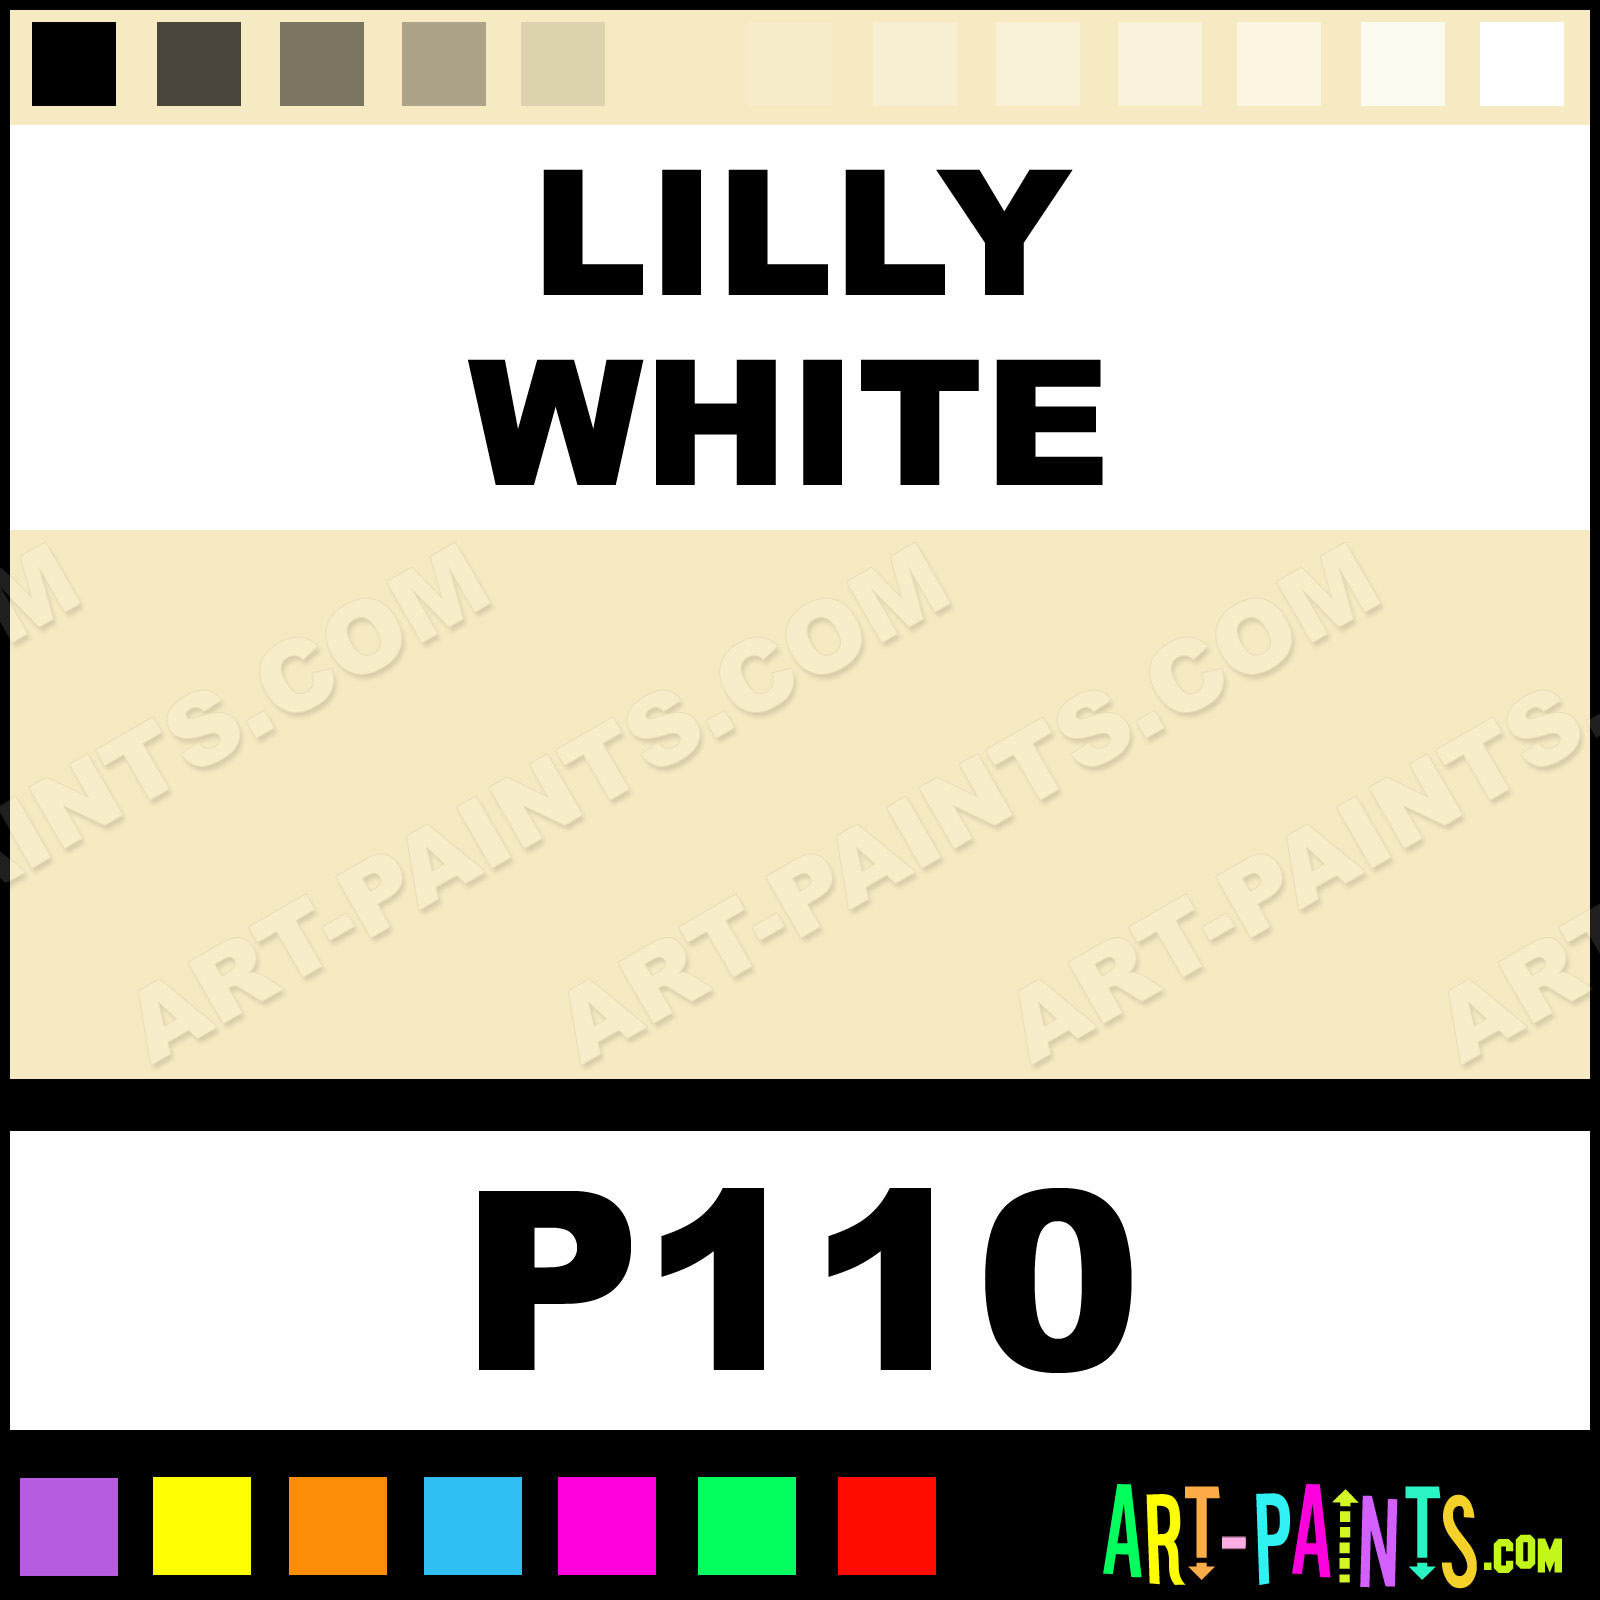  - Lilly-White-xlg